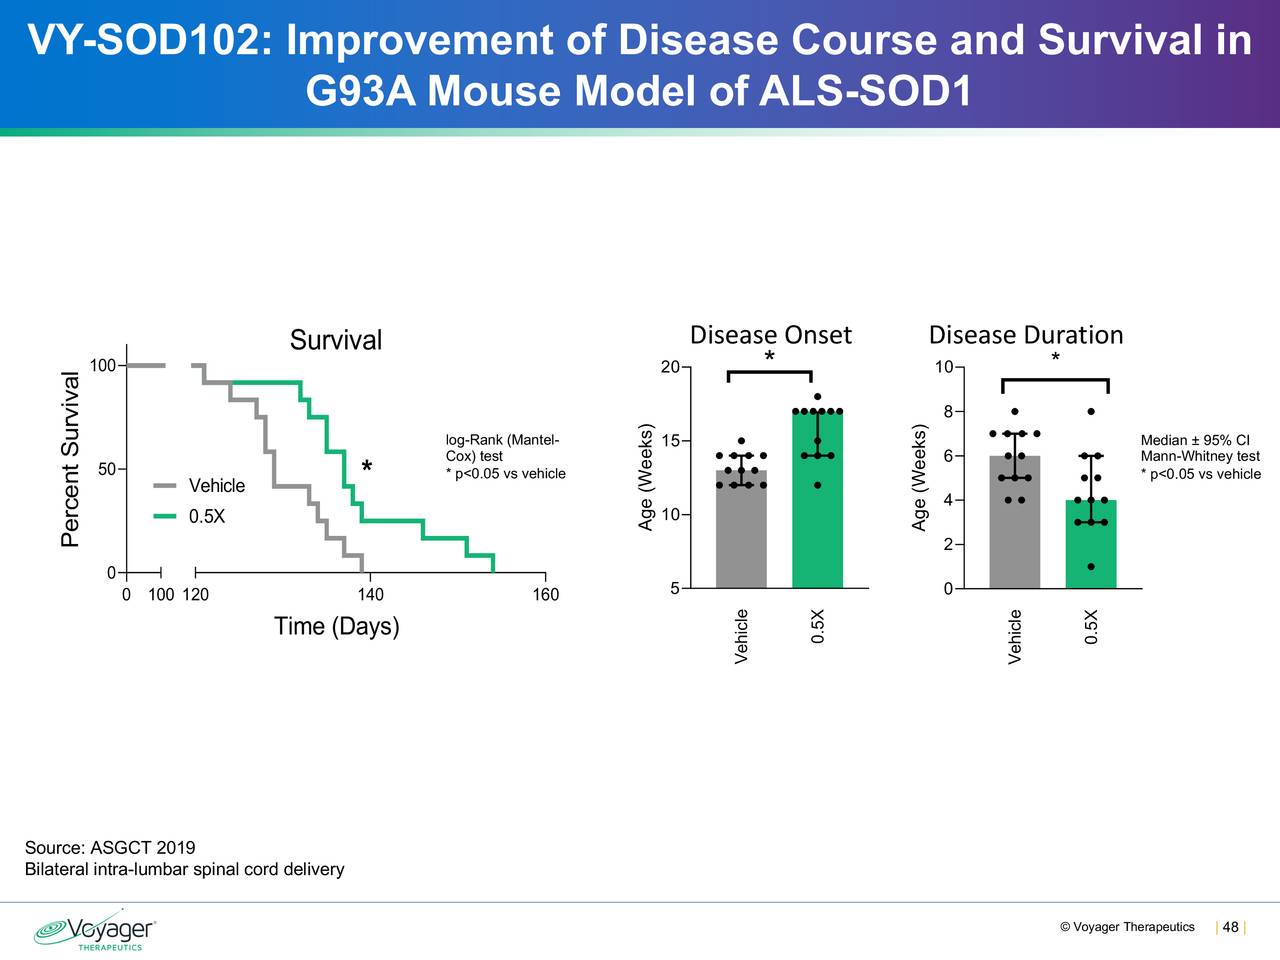 VY-SOD102: Improvement of Disease Course and Survival in